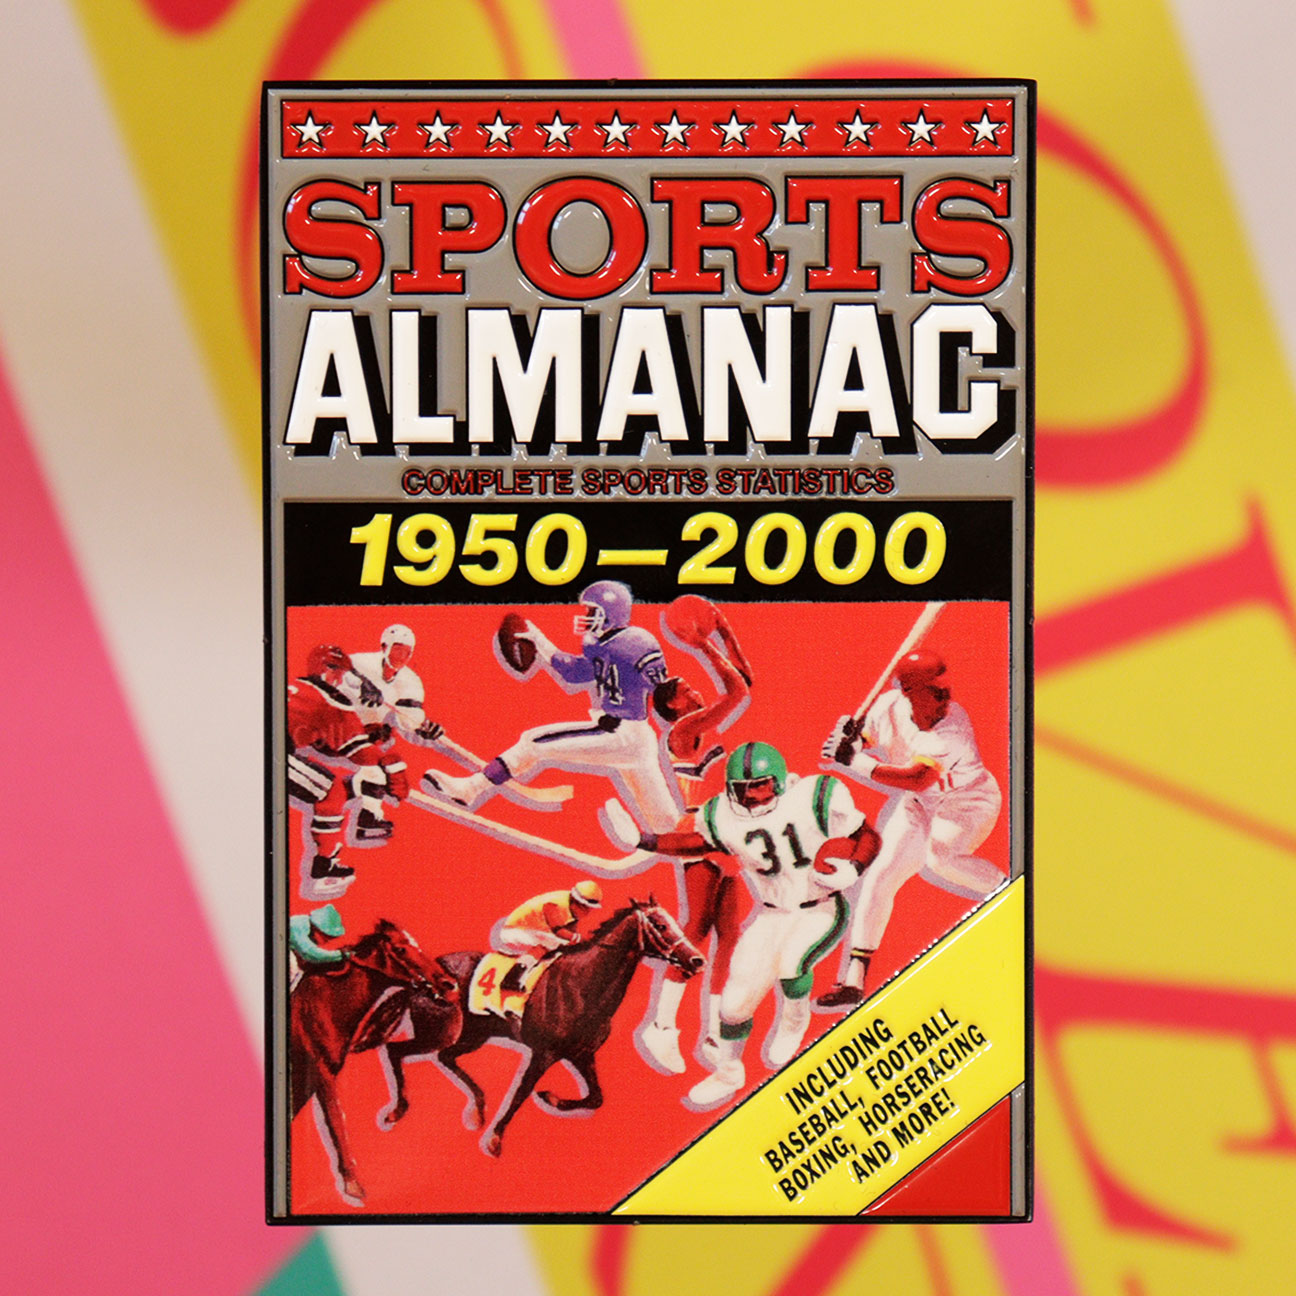 Back to the Future Limited Edition Sport Almanac Ingot